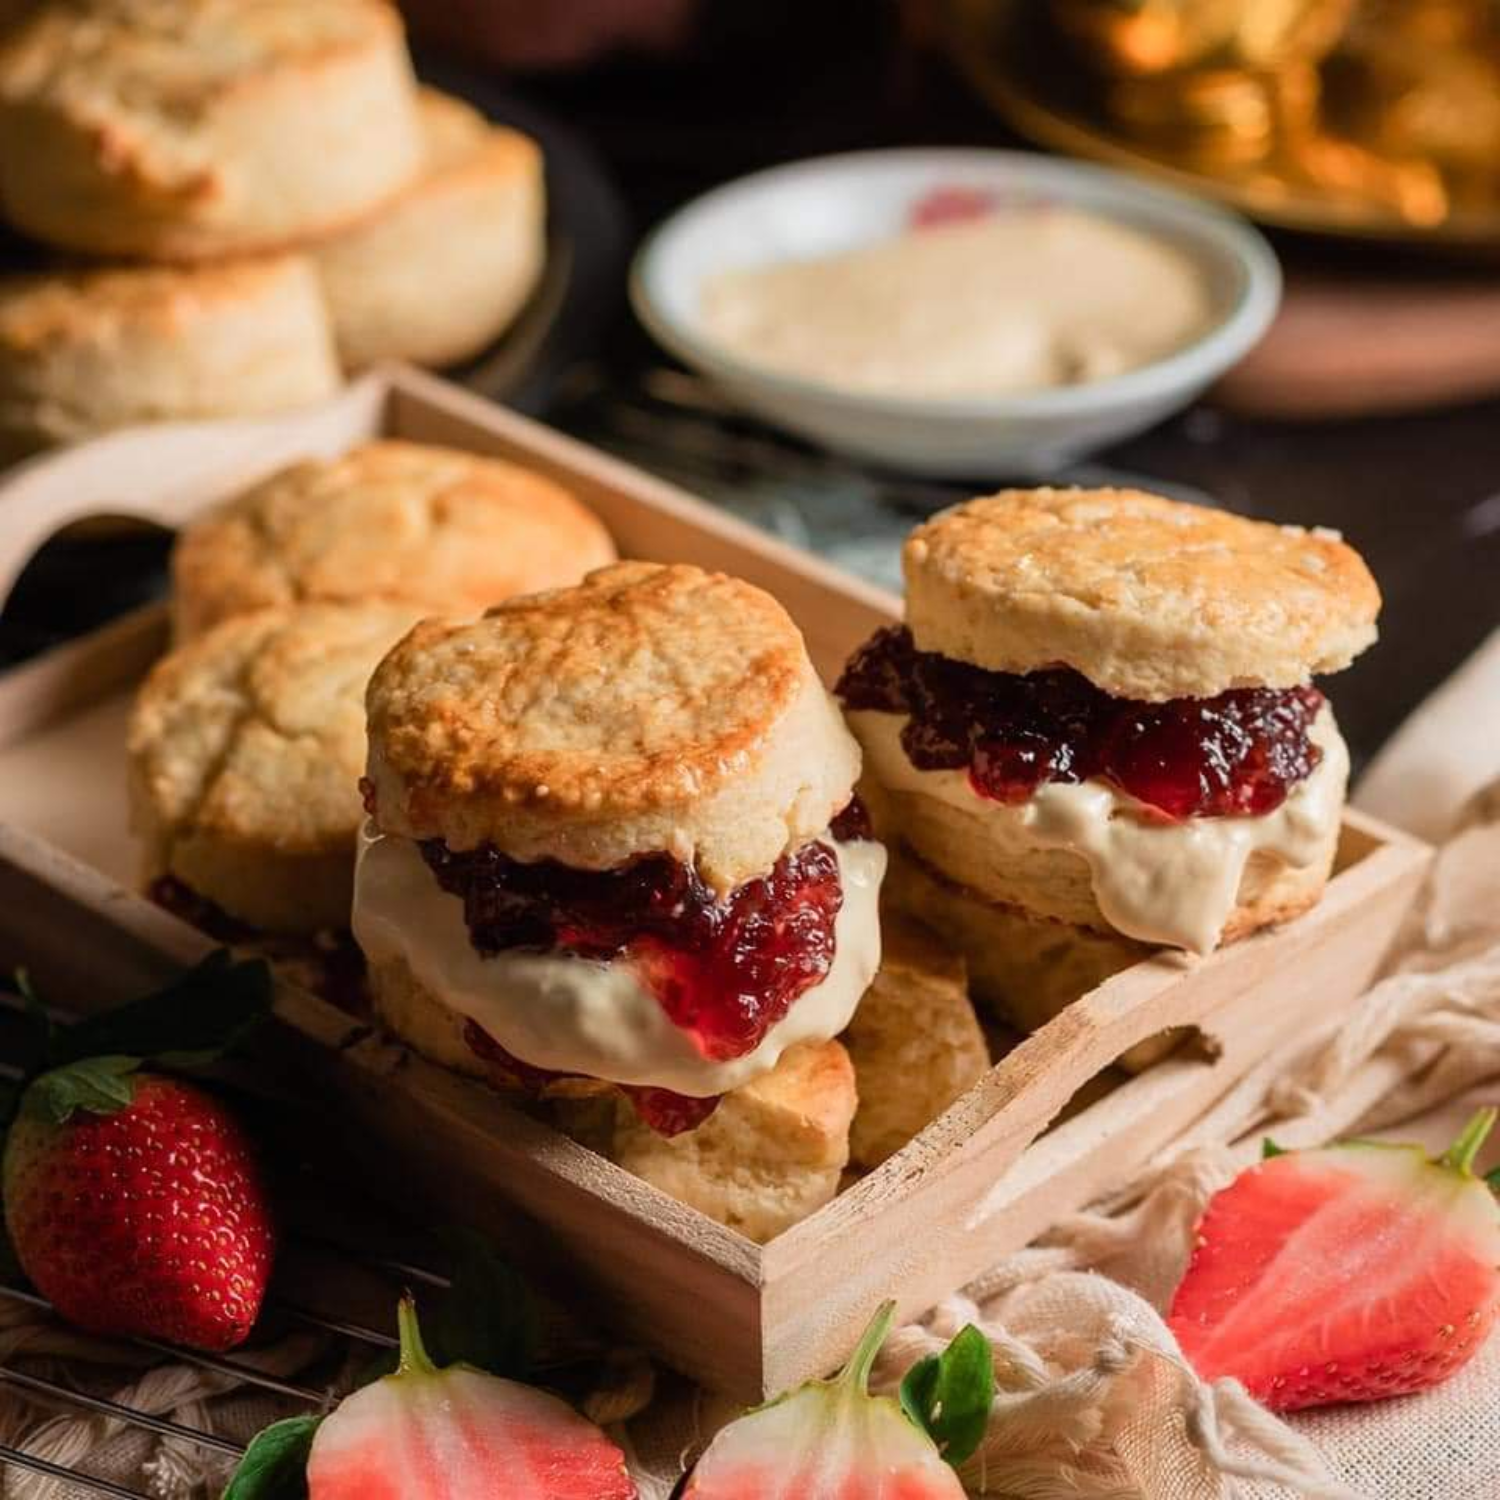 Naked Goat Farm Strawberry Balsamic Jam on Biscuits